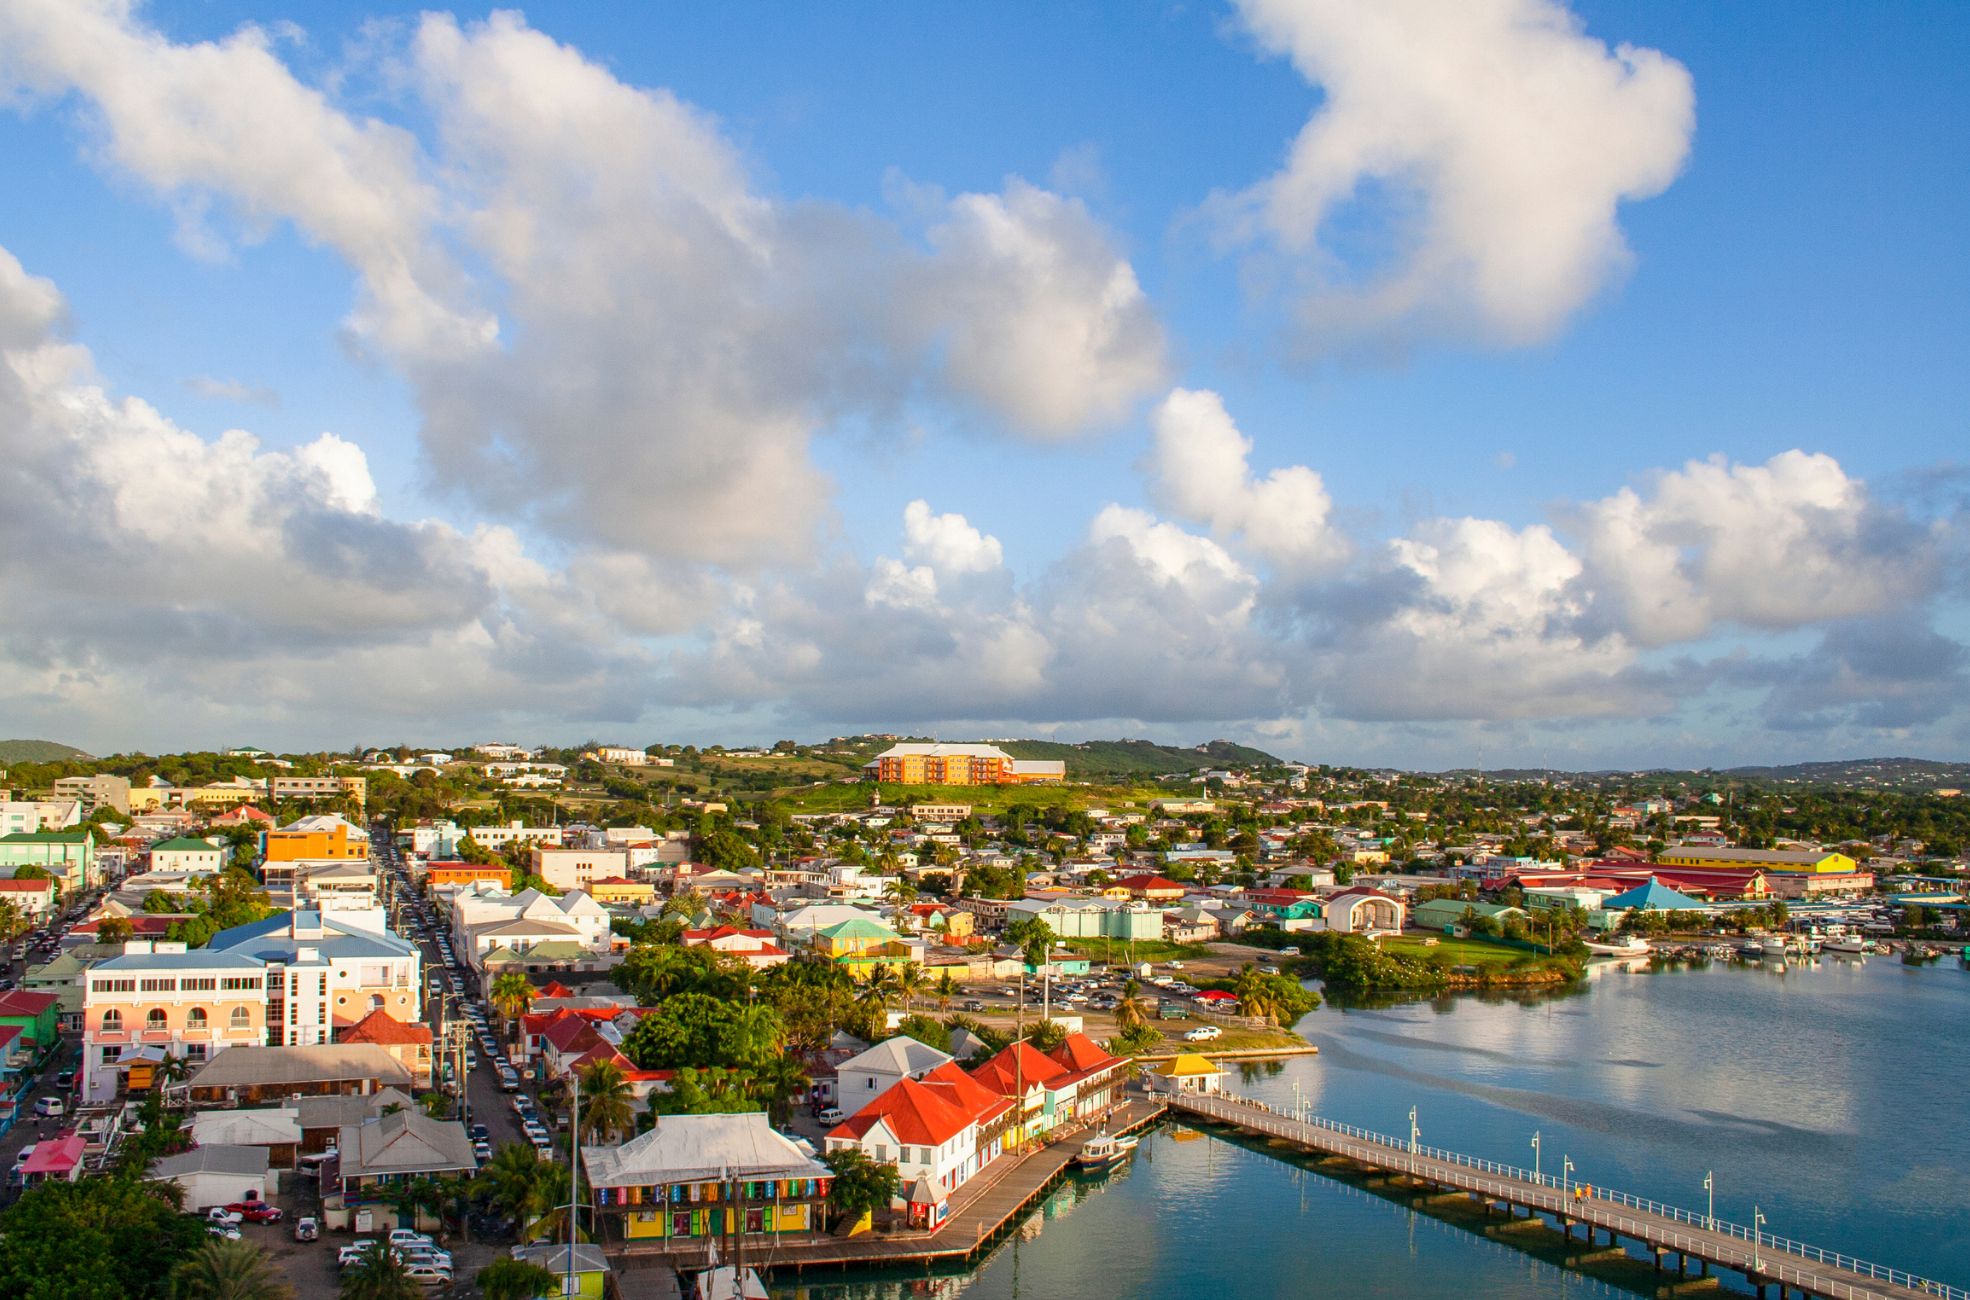 Housing And Waterway In Antigua And Barbuda